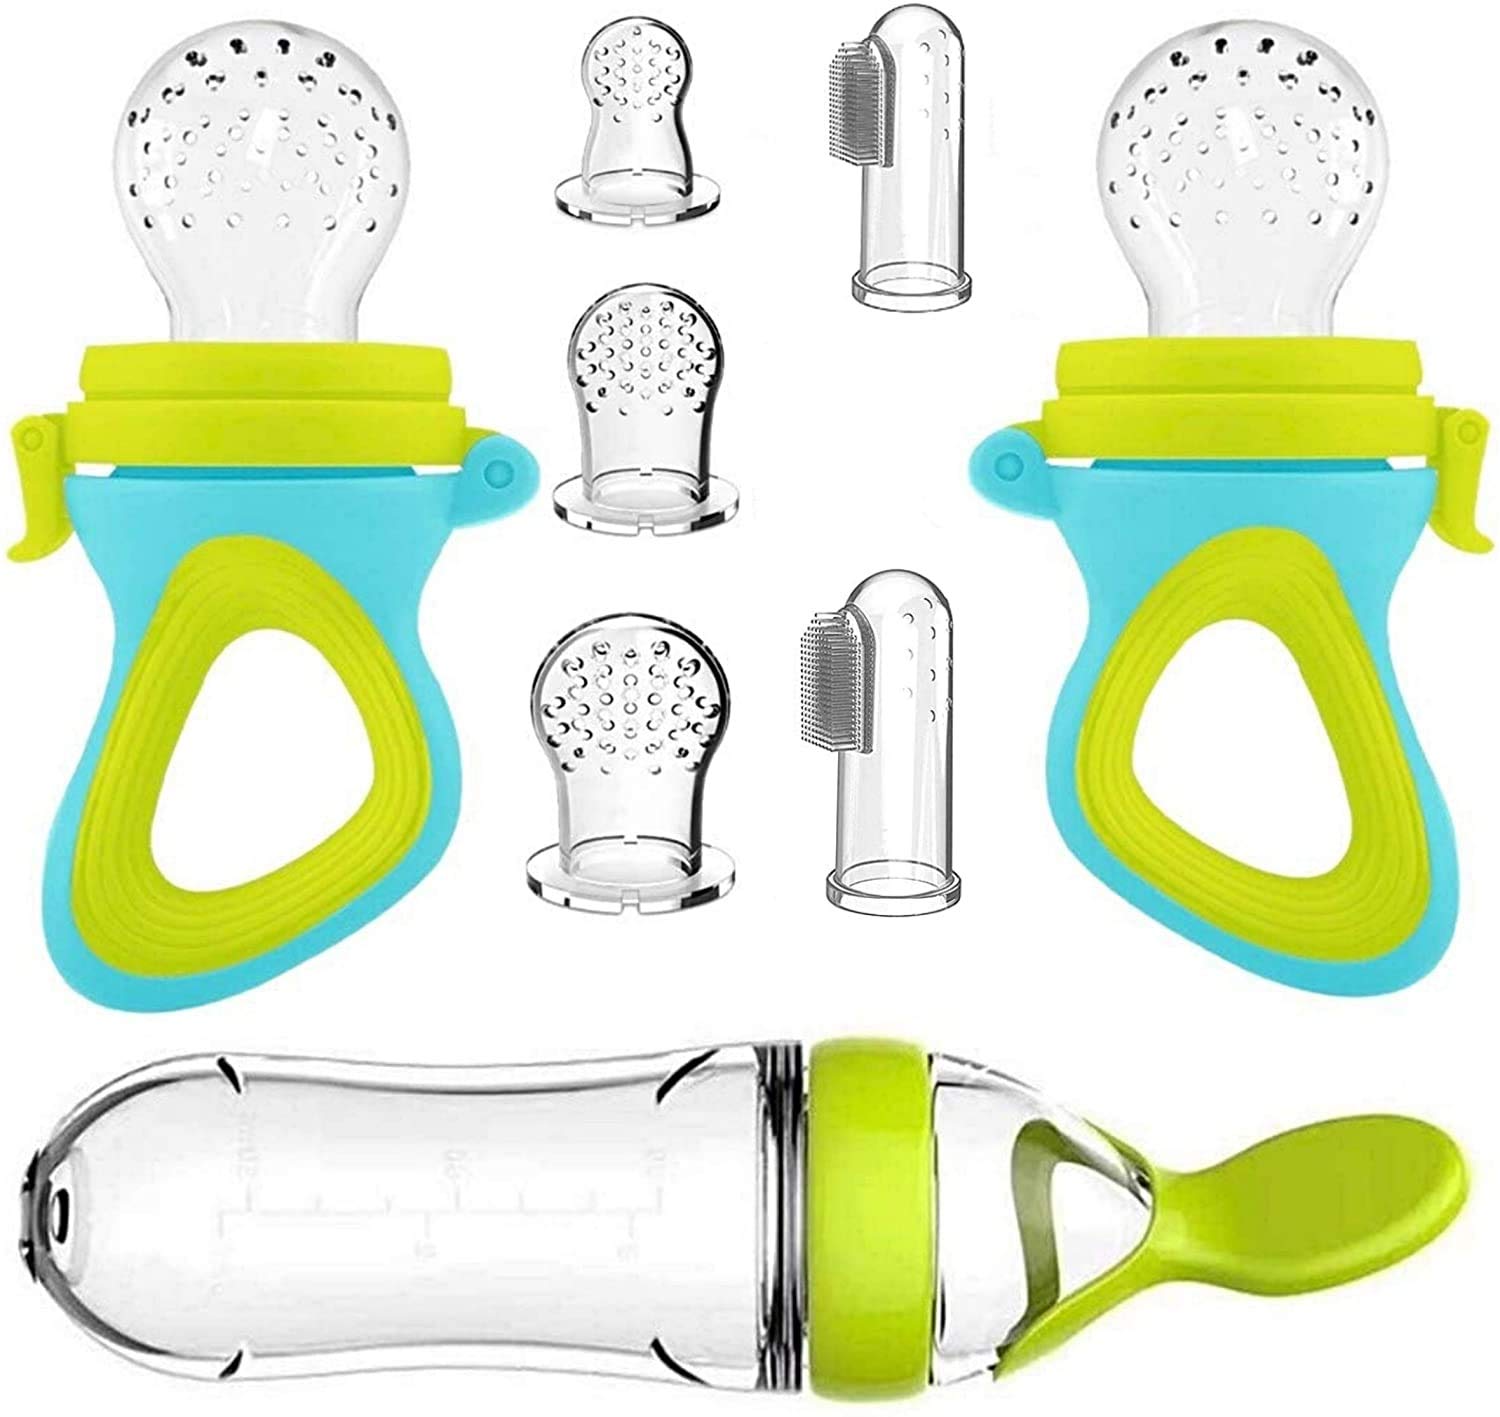 Baby Food Feeder Set, TASIPA Silicone Fruit Teether Feeder with 3 Different Sized Silicone Teething Pacifiers, 2 Baby Finger Toothbrushes ,1 Pack Baby Food Dispensing Spoon for Toddlers Infants